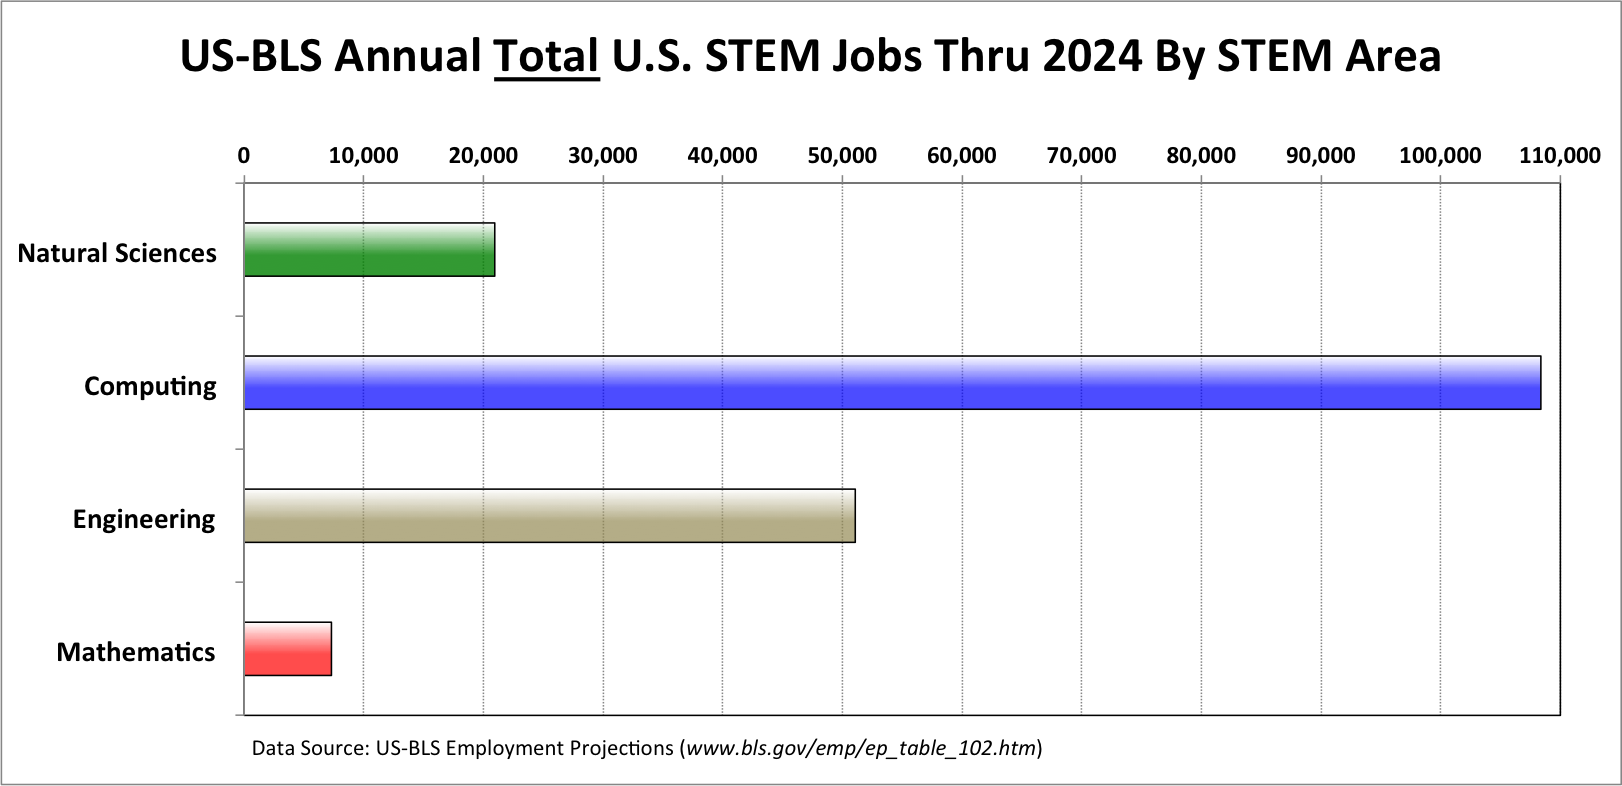 The U.S. Bureau of Labor predicts that between now and 2024,
            60% of the total STEM jobs will be computing jobs